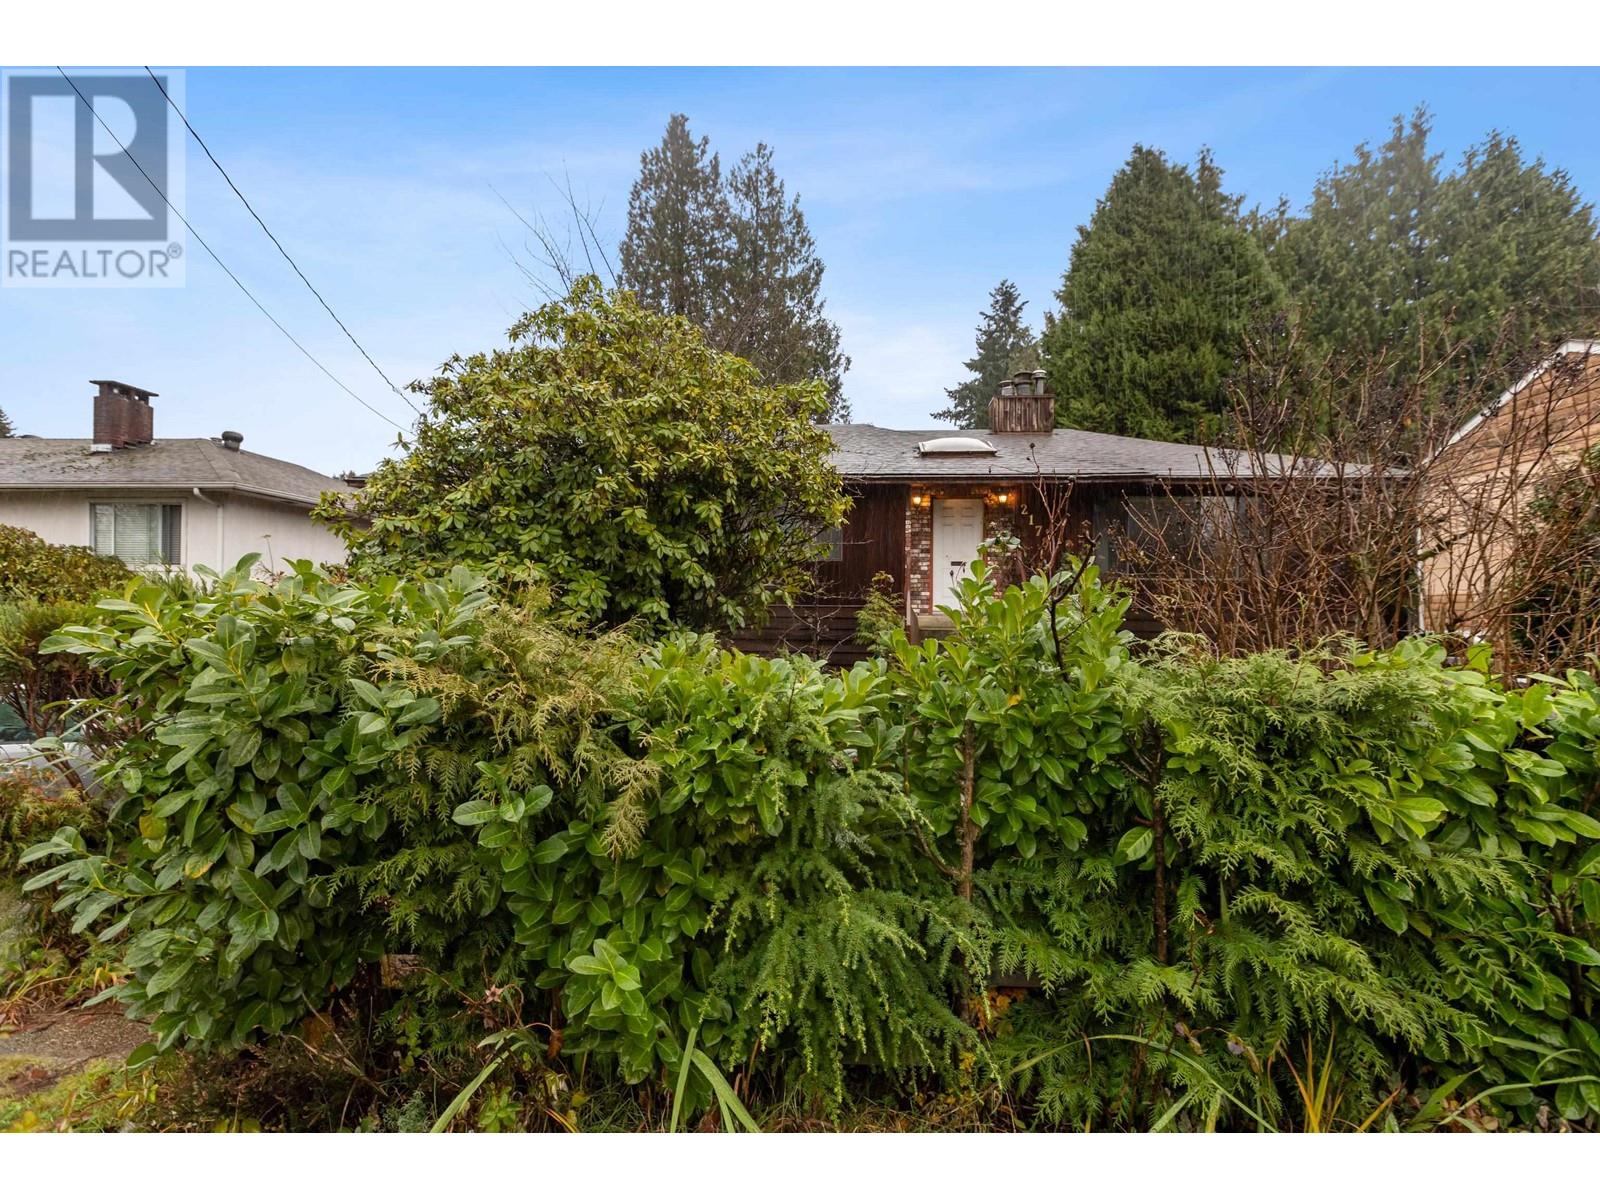 2178 MARY HILL ROAD, Port Coquitlam